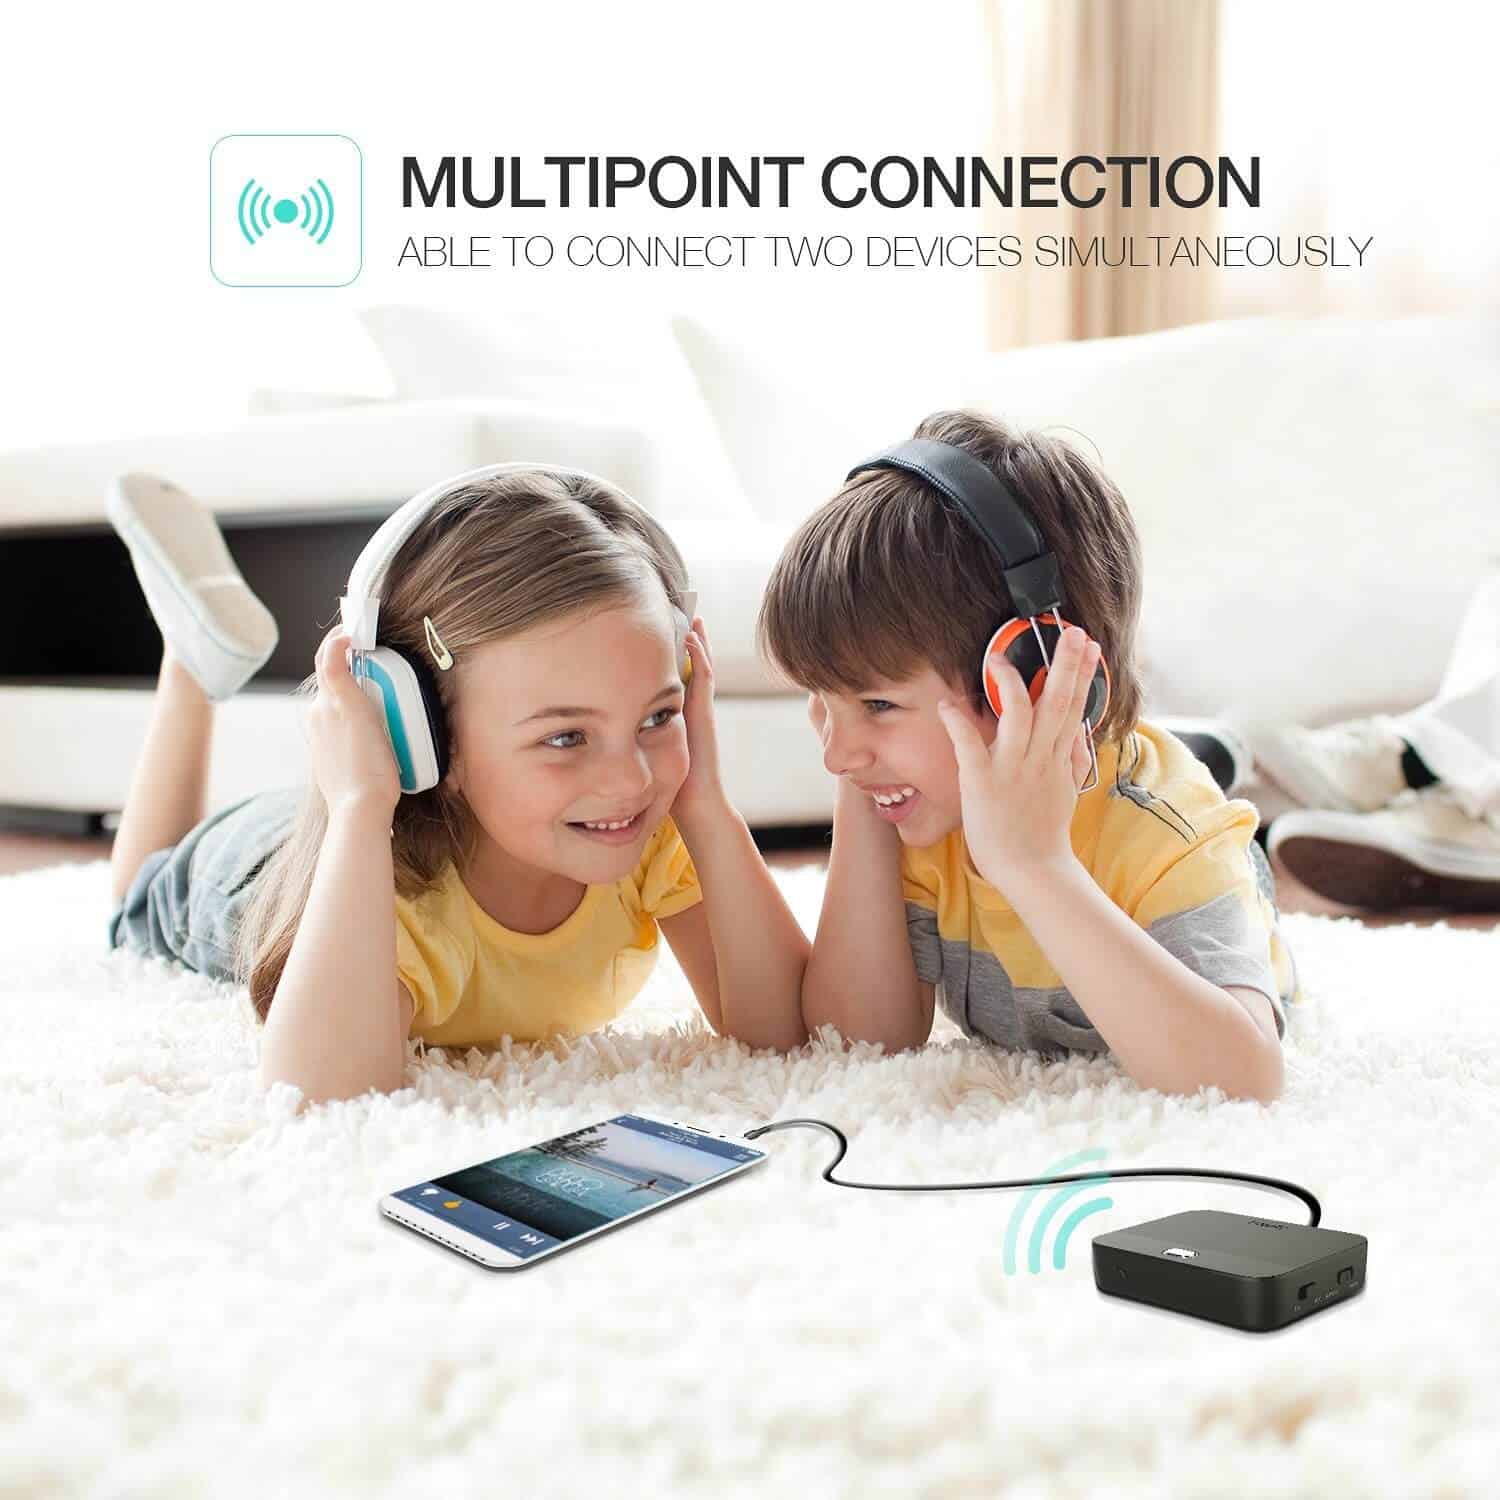 HAVIT HV-BT022 Optical Bluetooth Transmitter & Receiver with Low Latency & 3.5mm AUX